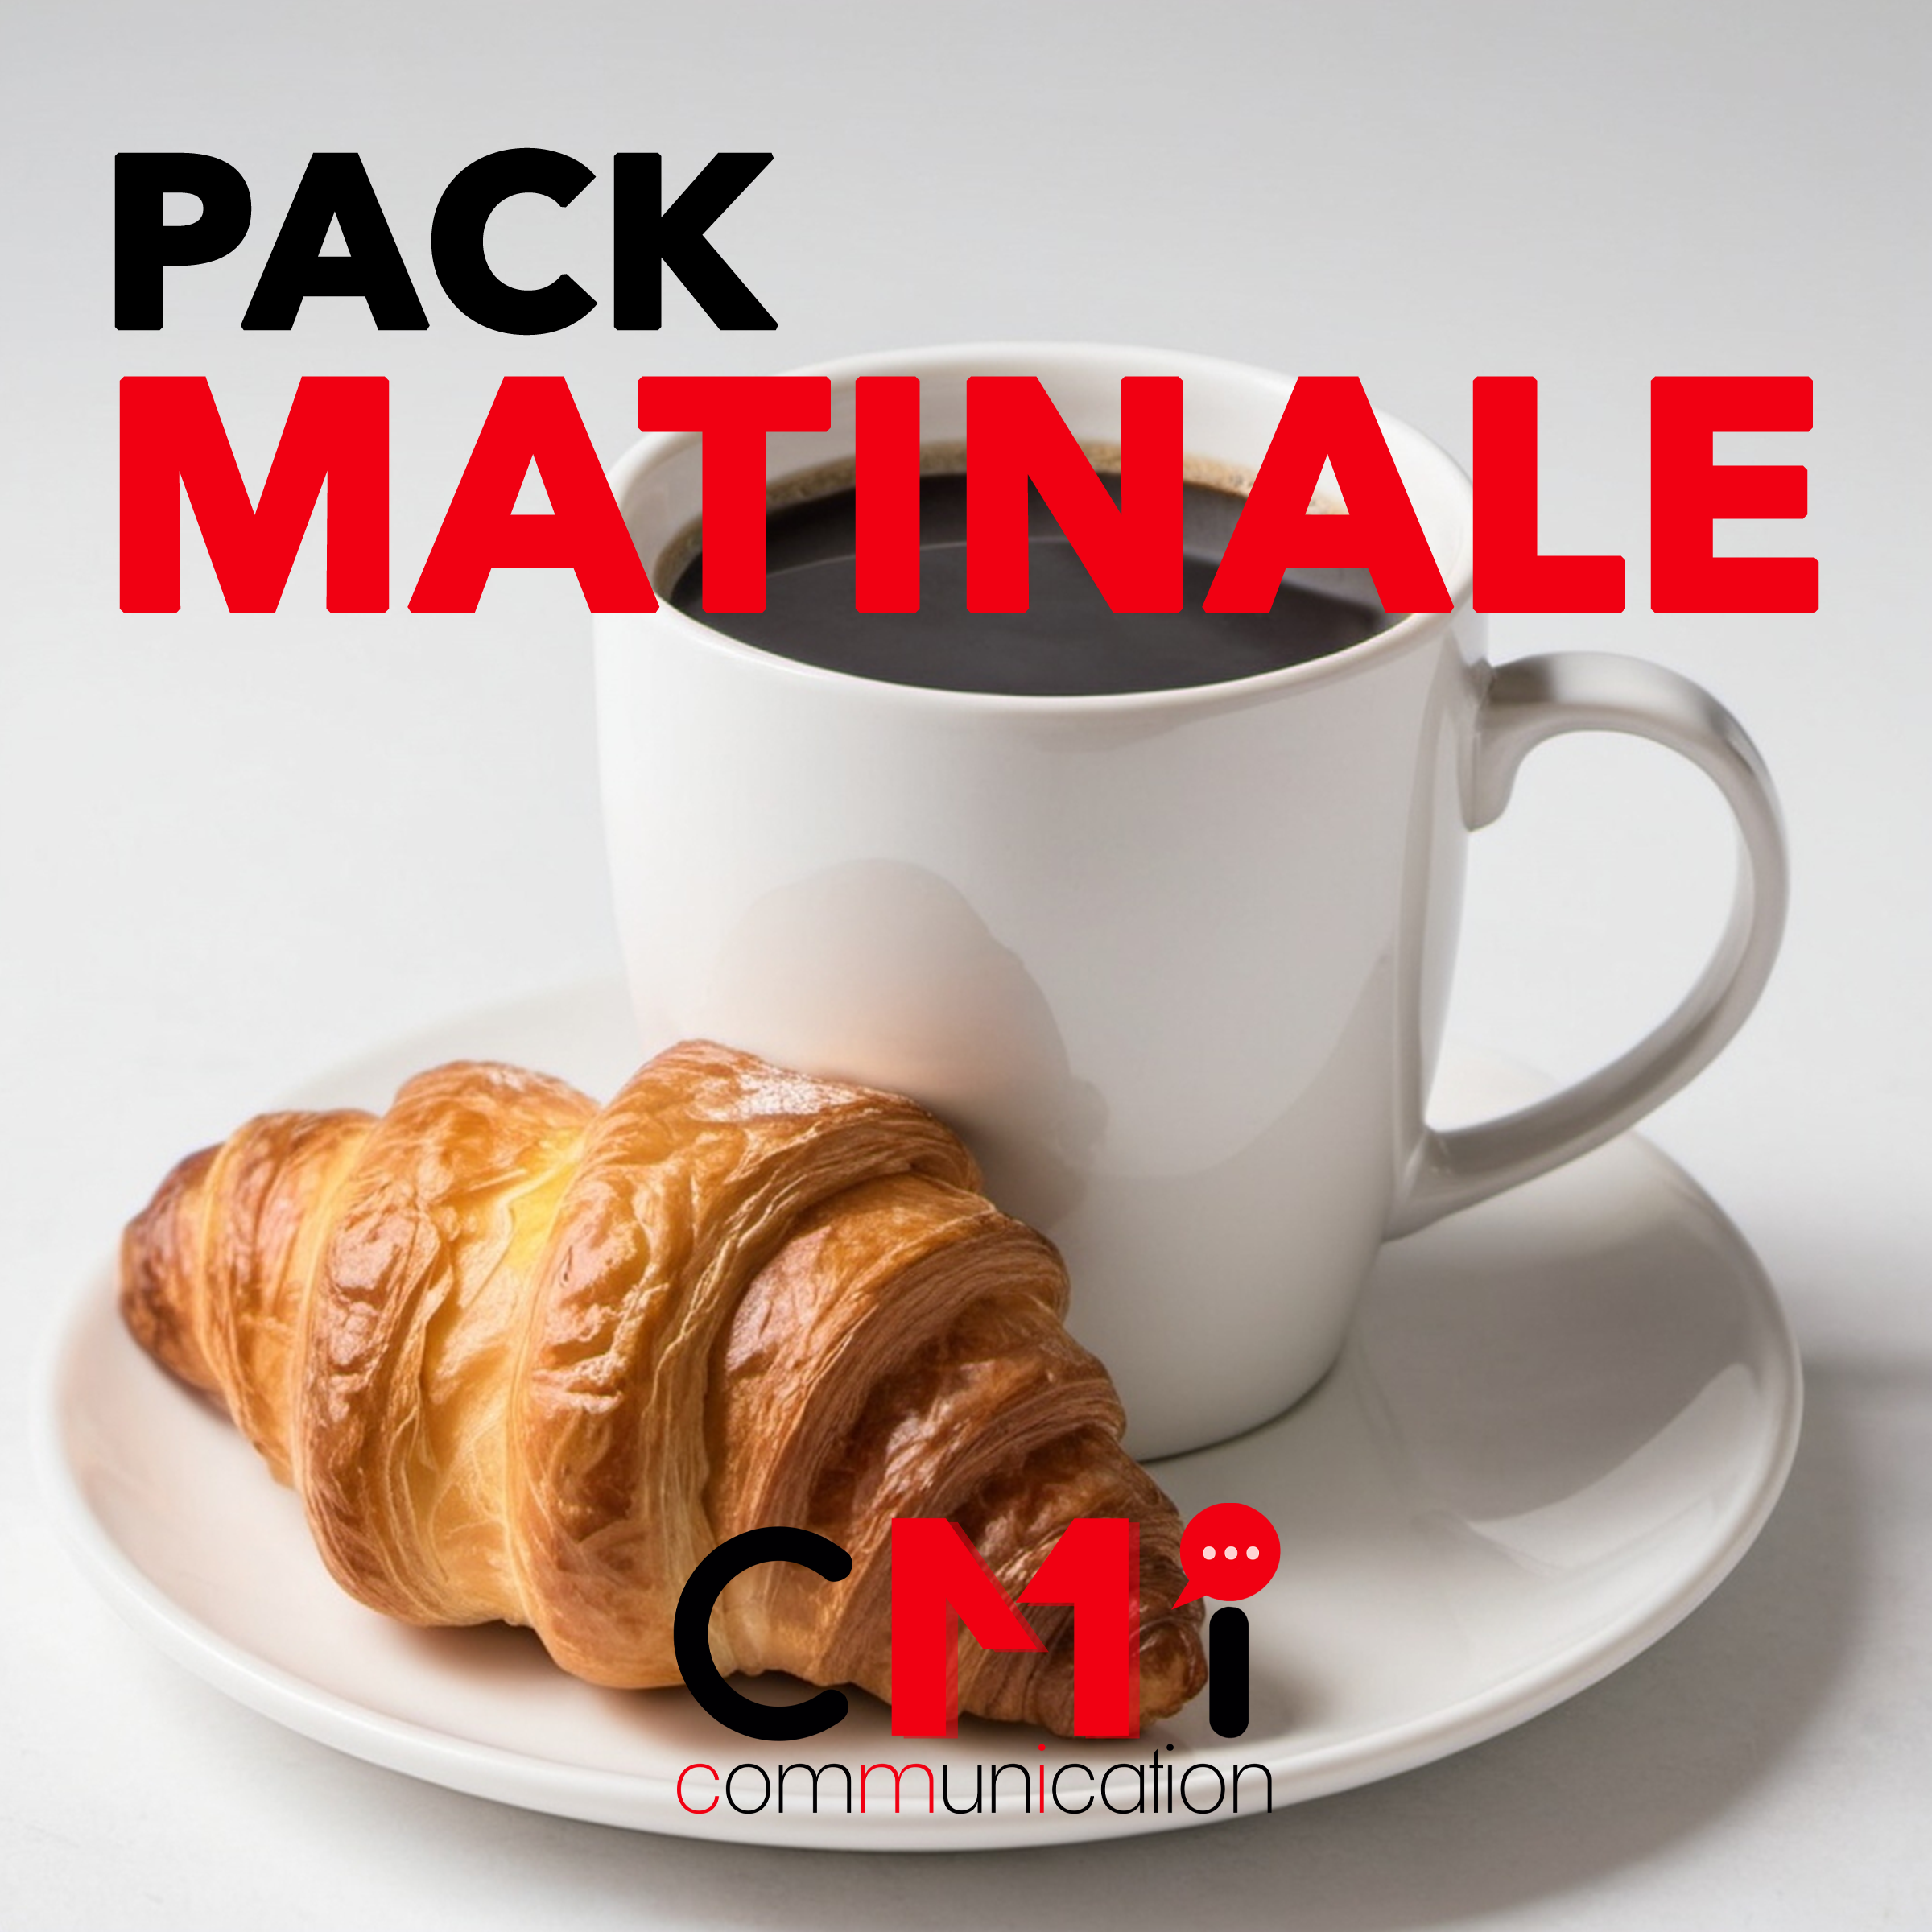 Pack matinale